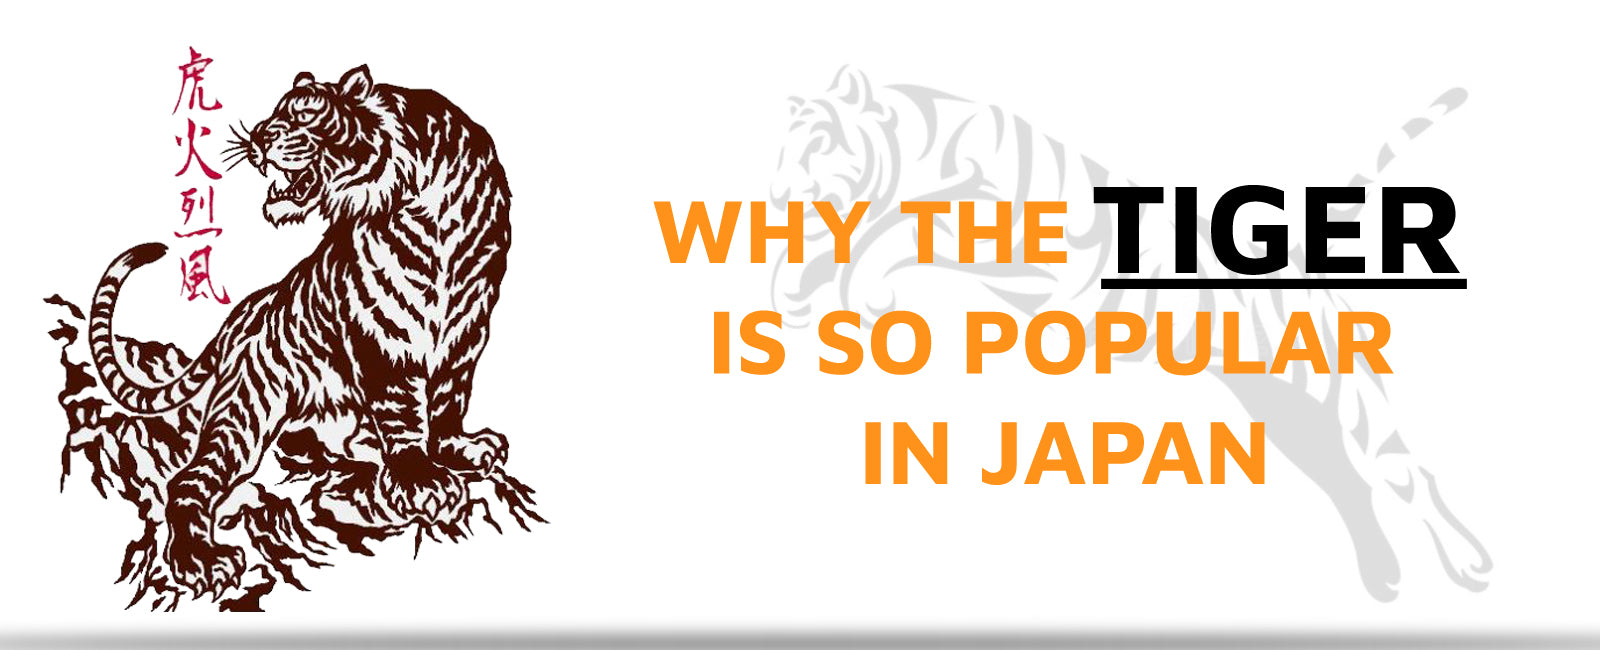 What Does The Tiger Symbolize in Japan?